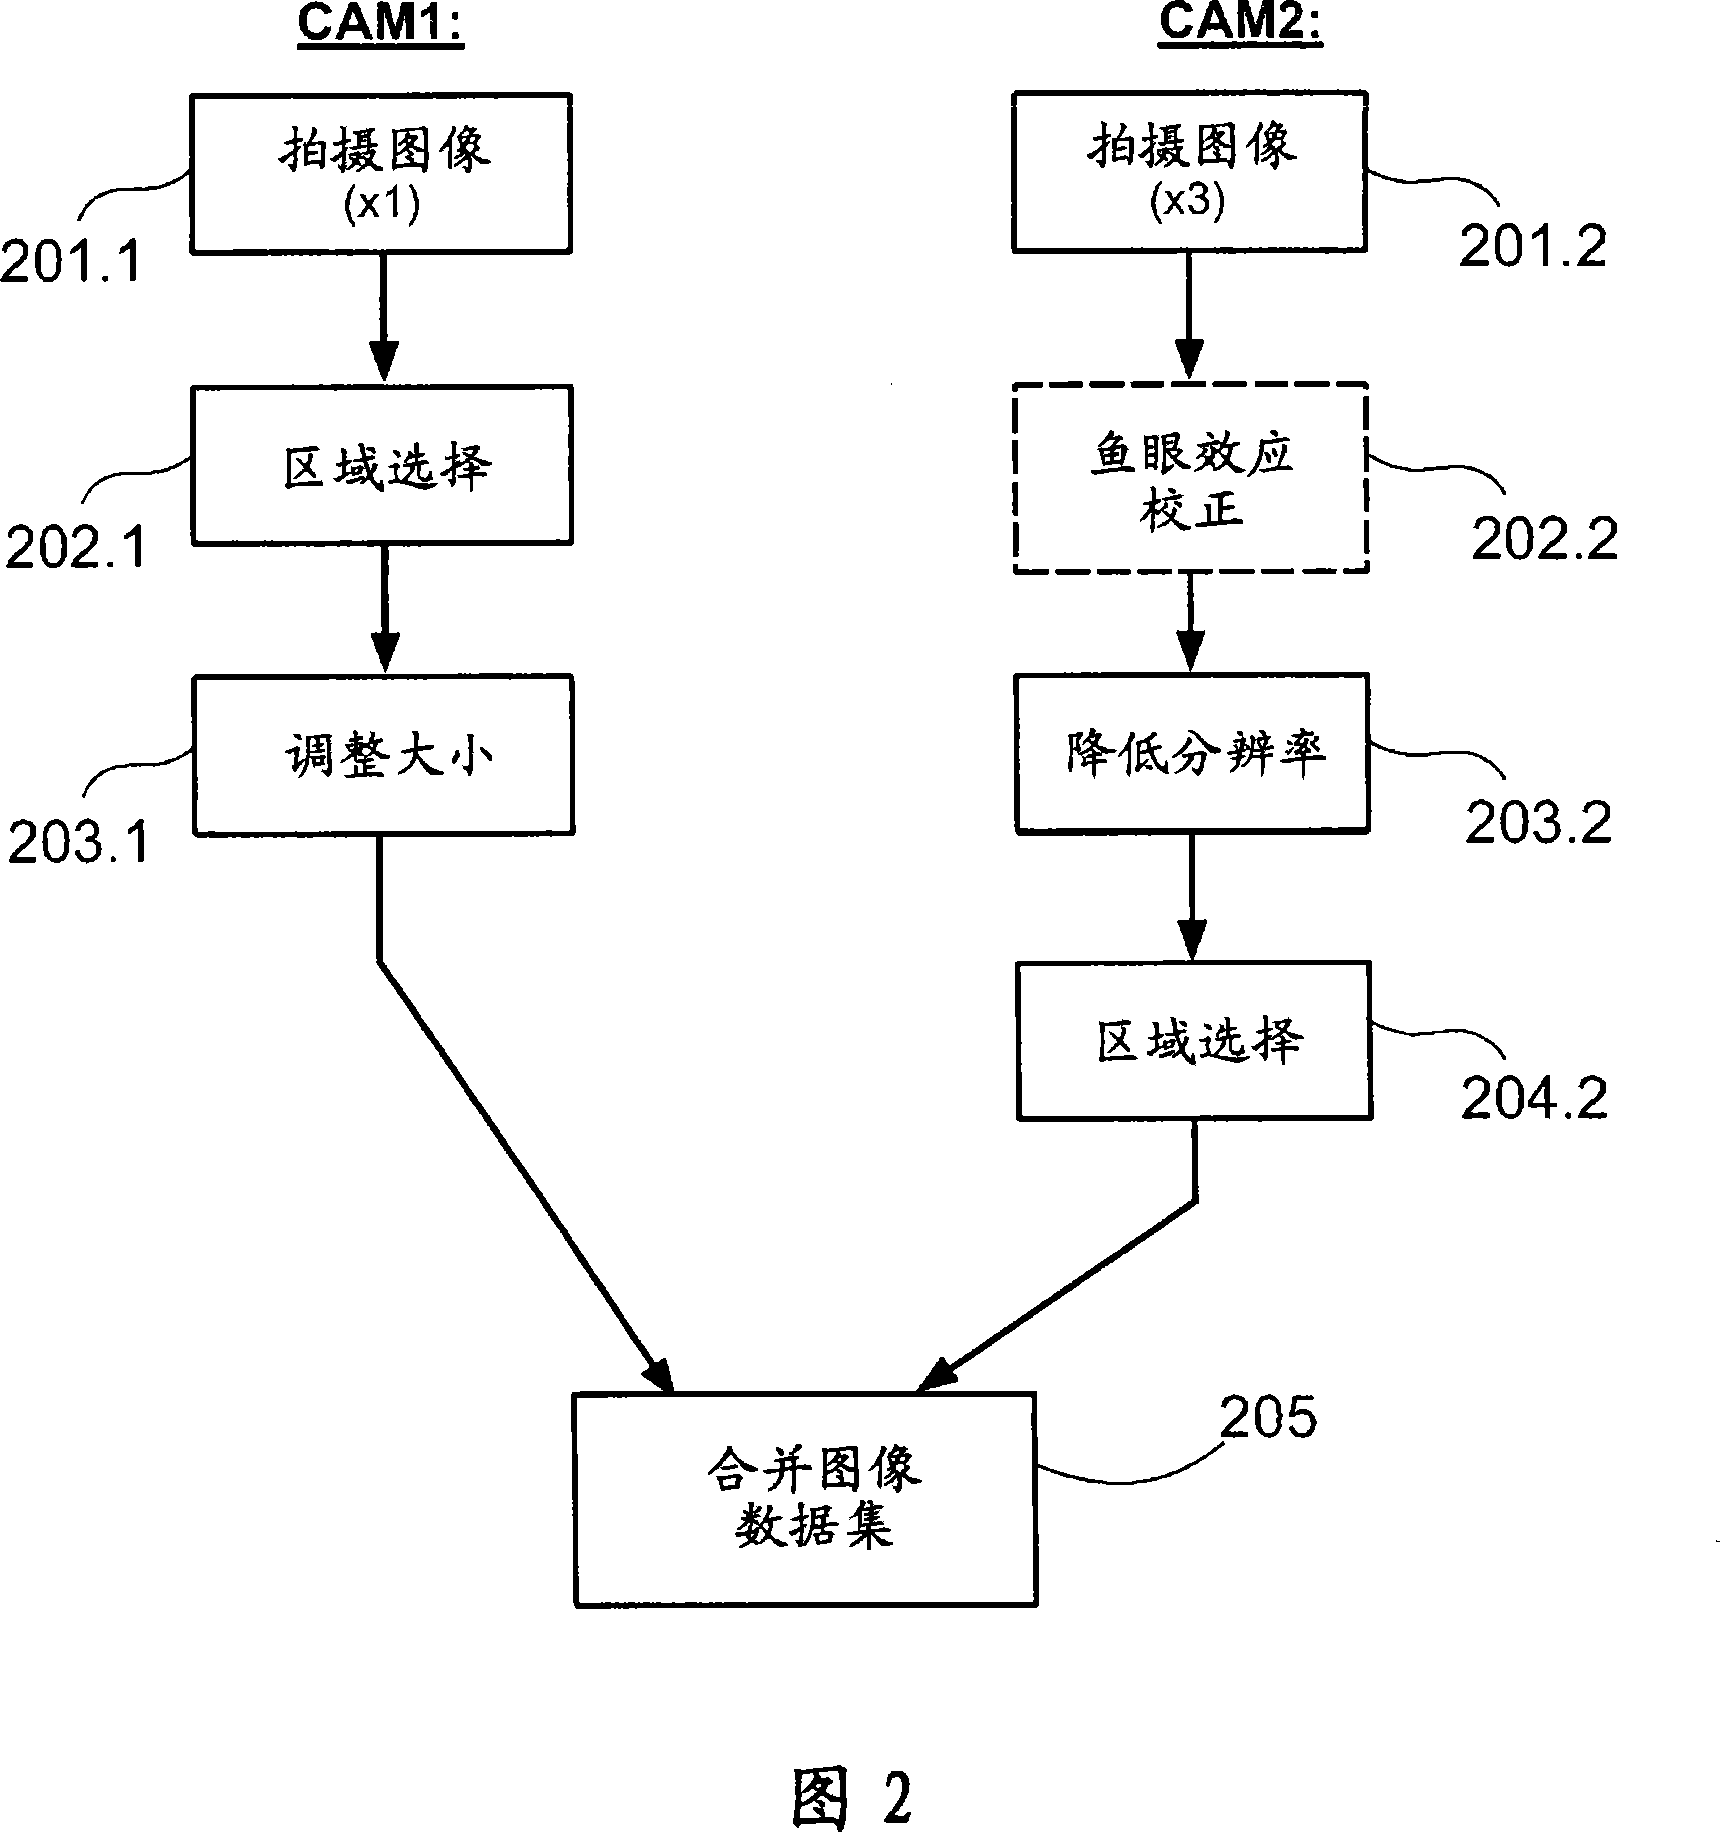 Electronic device and a method in an electronic device for forming image information, and a corresponding program product